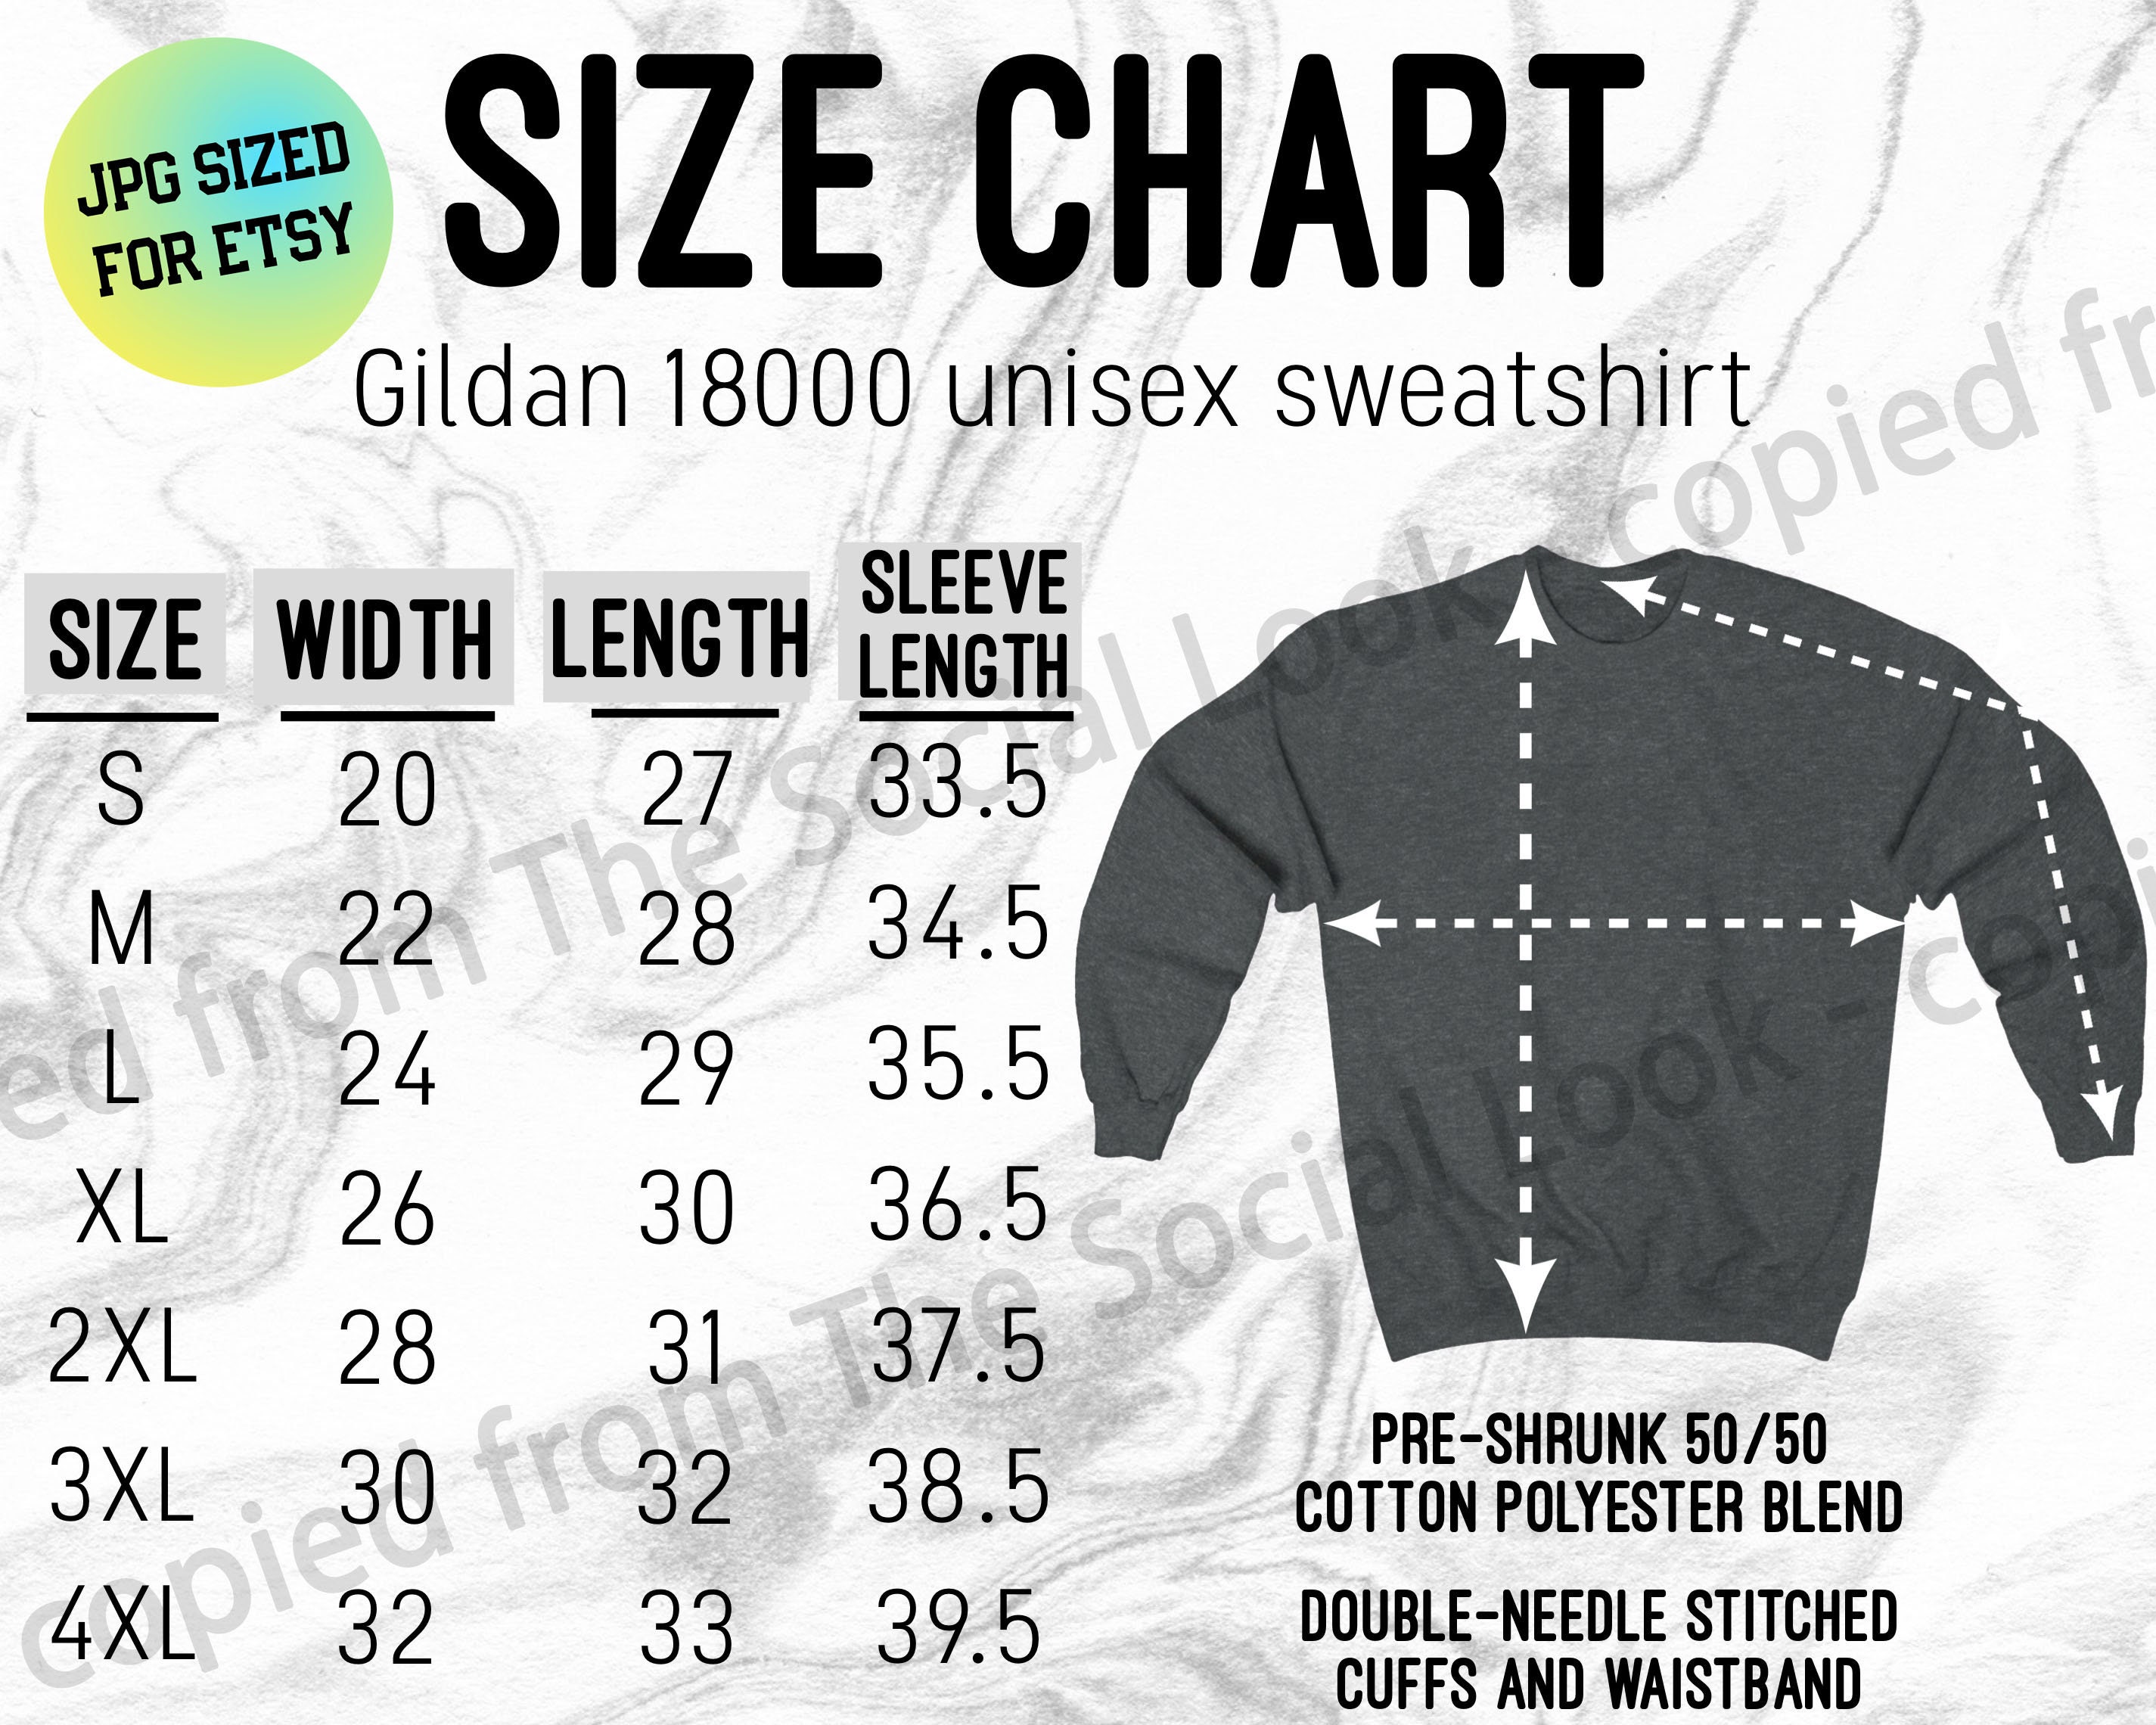 Size Chart for Hoodies - Men & Womens Unisex Sizing